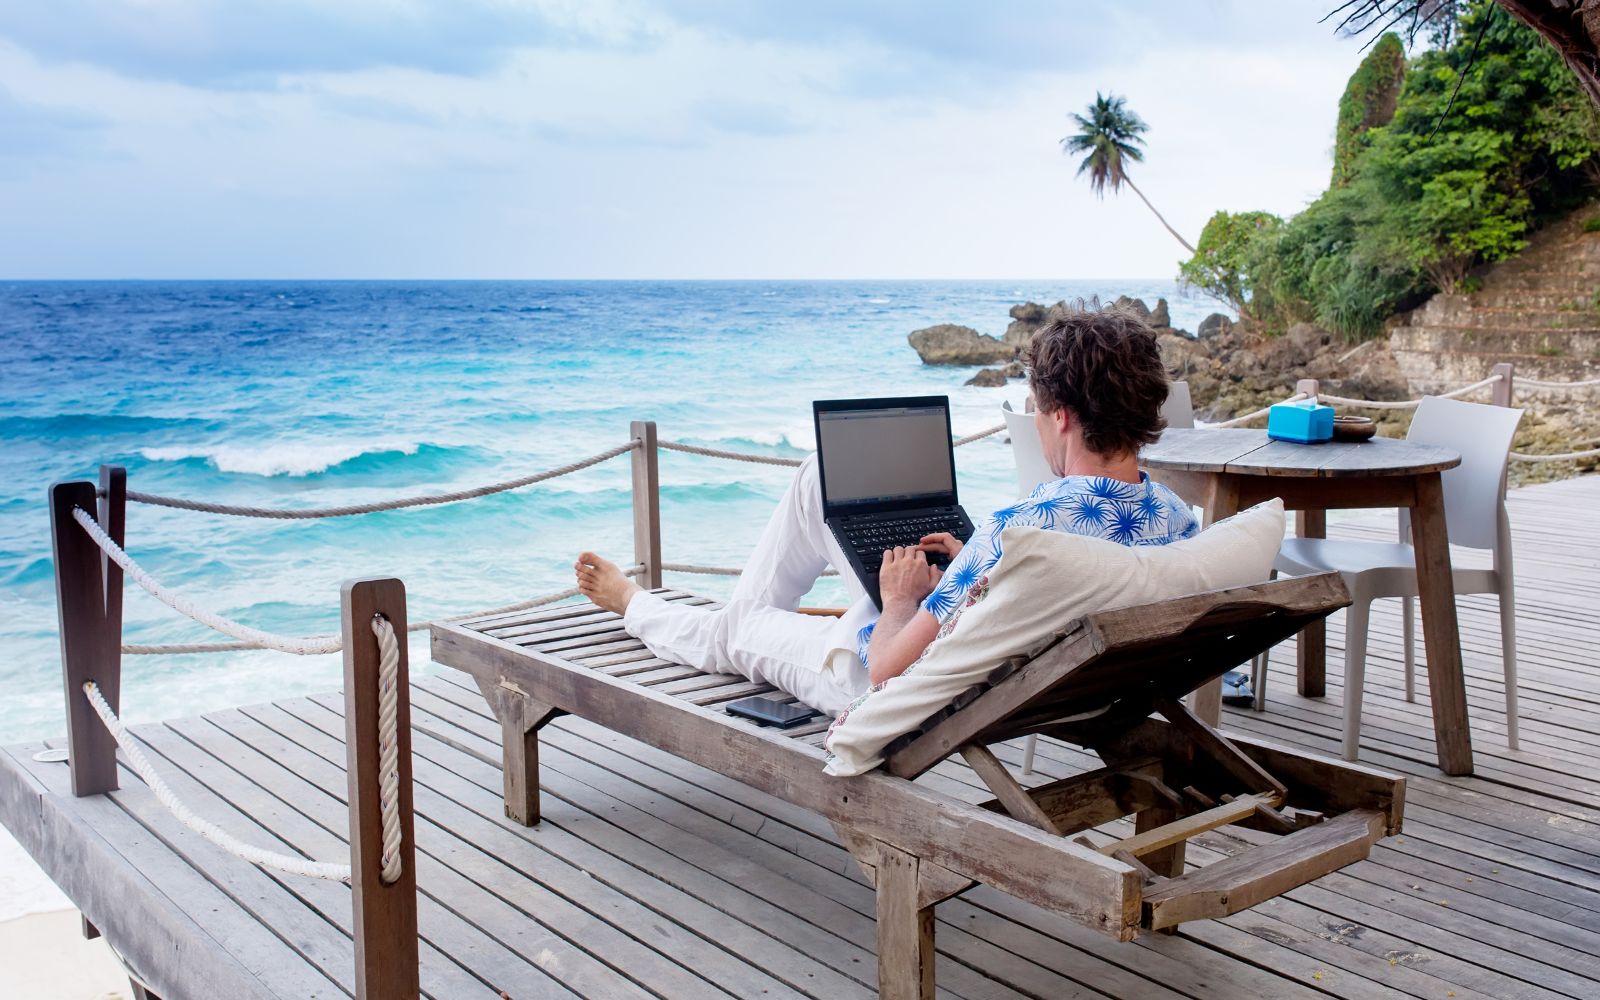 Remote Work Has Changed Leisure Travel